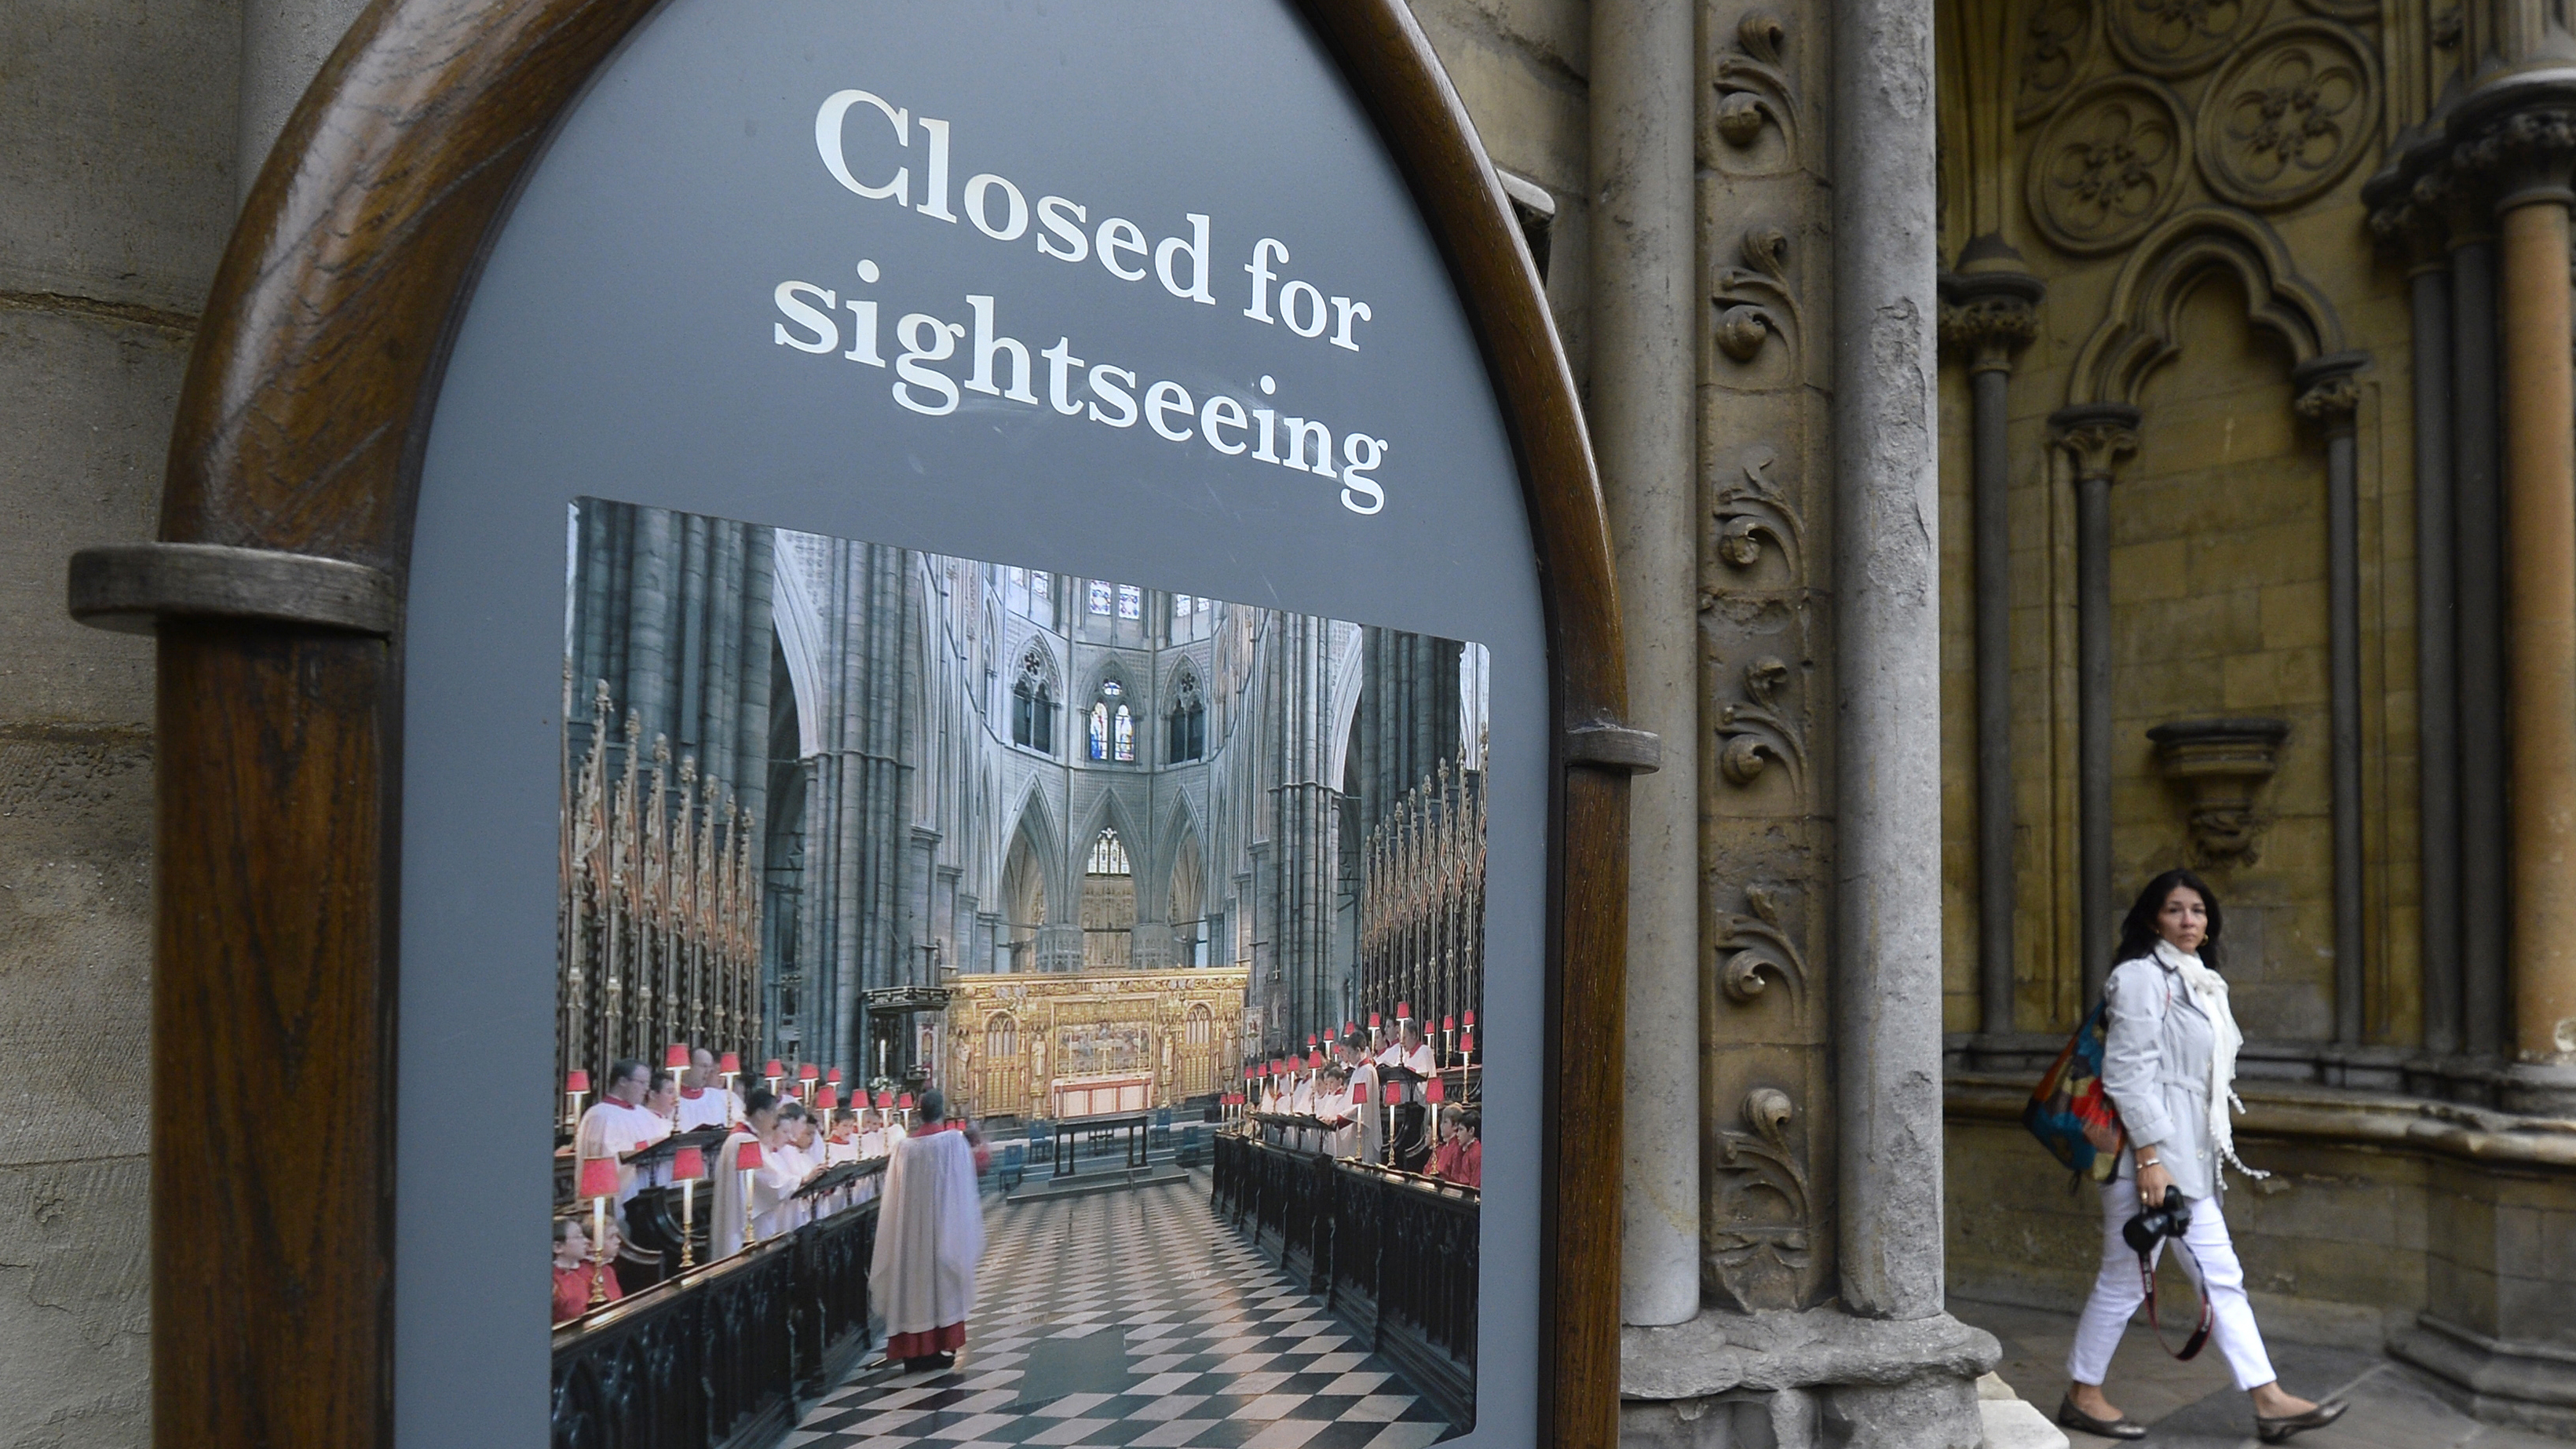 Its members have scaled the palace, hijacked the National Lottery and are claiming connection to the defaced painting in Westminster Abbey. But what has Fathers 4 Justice achieved?